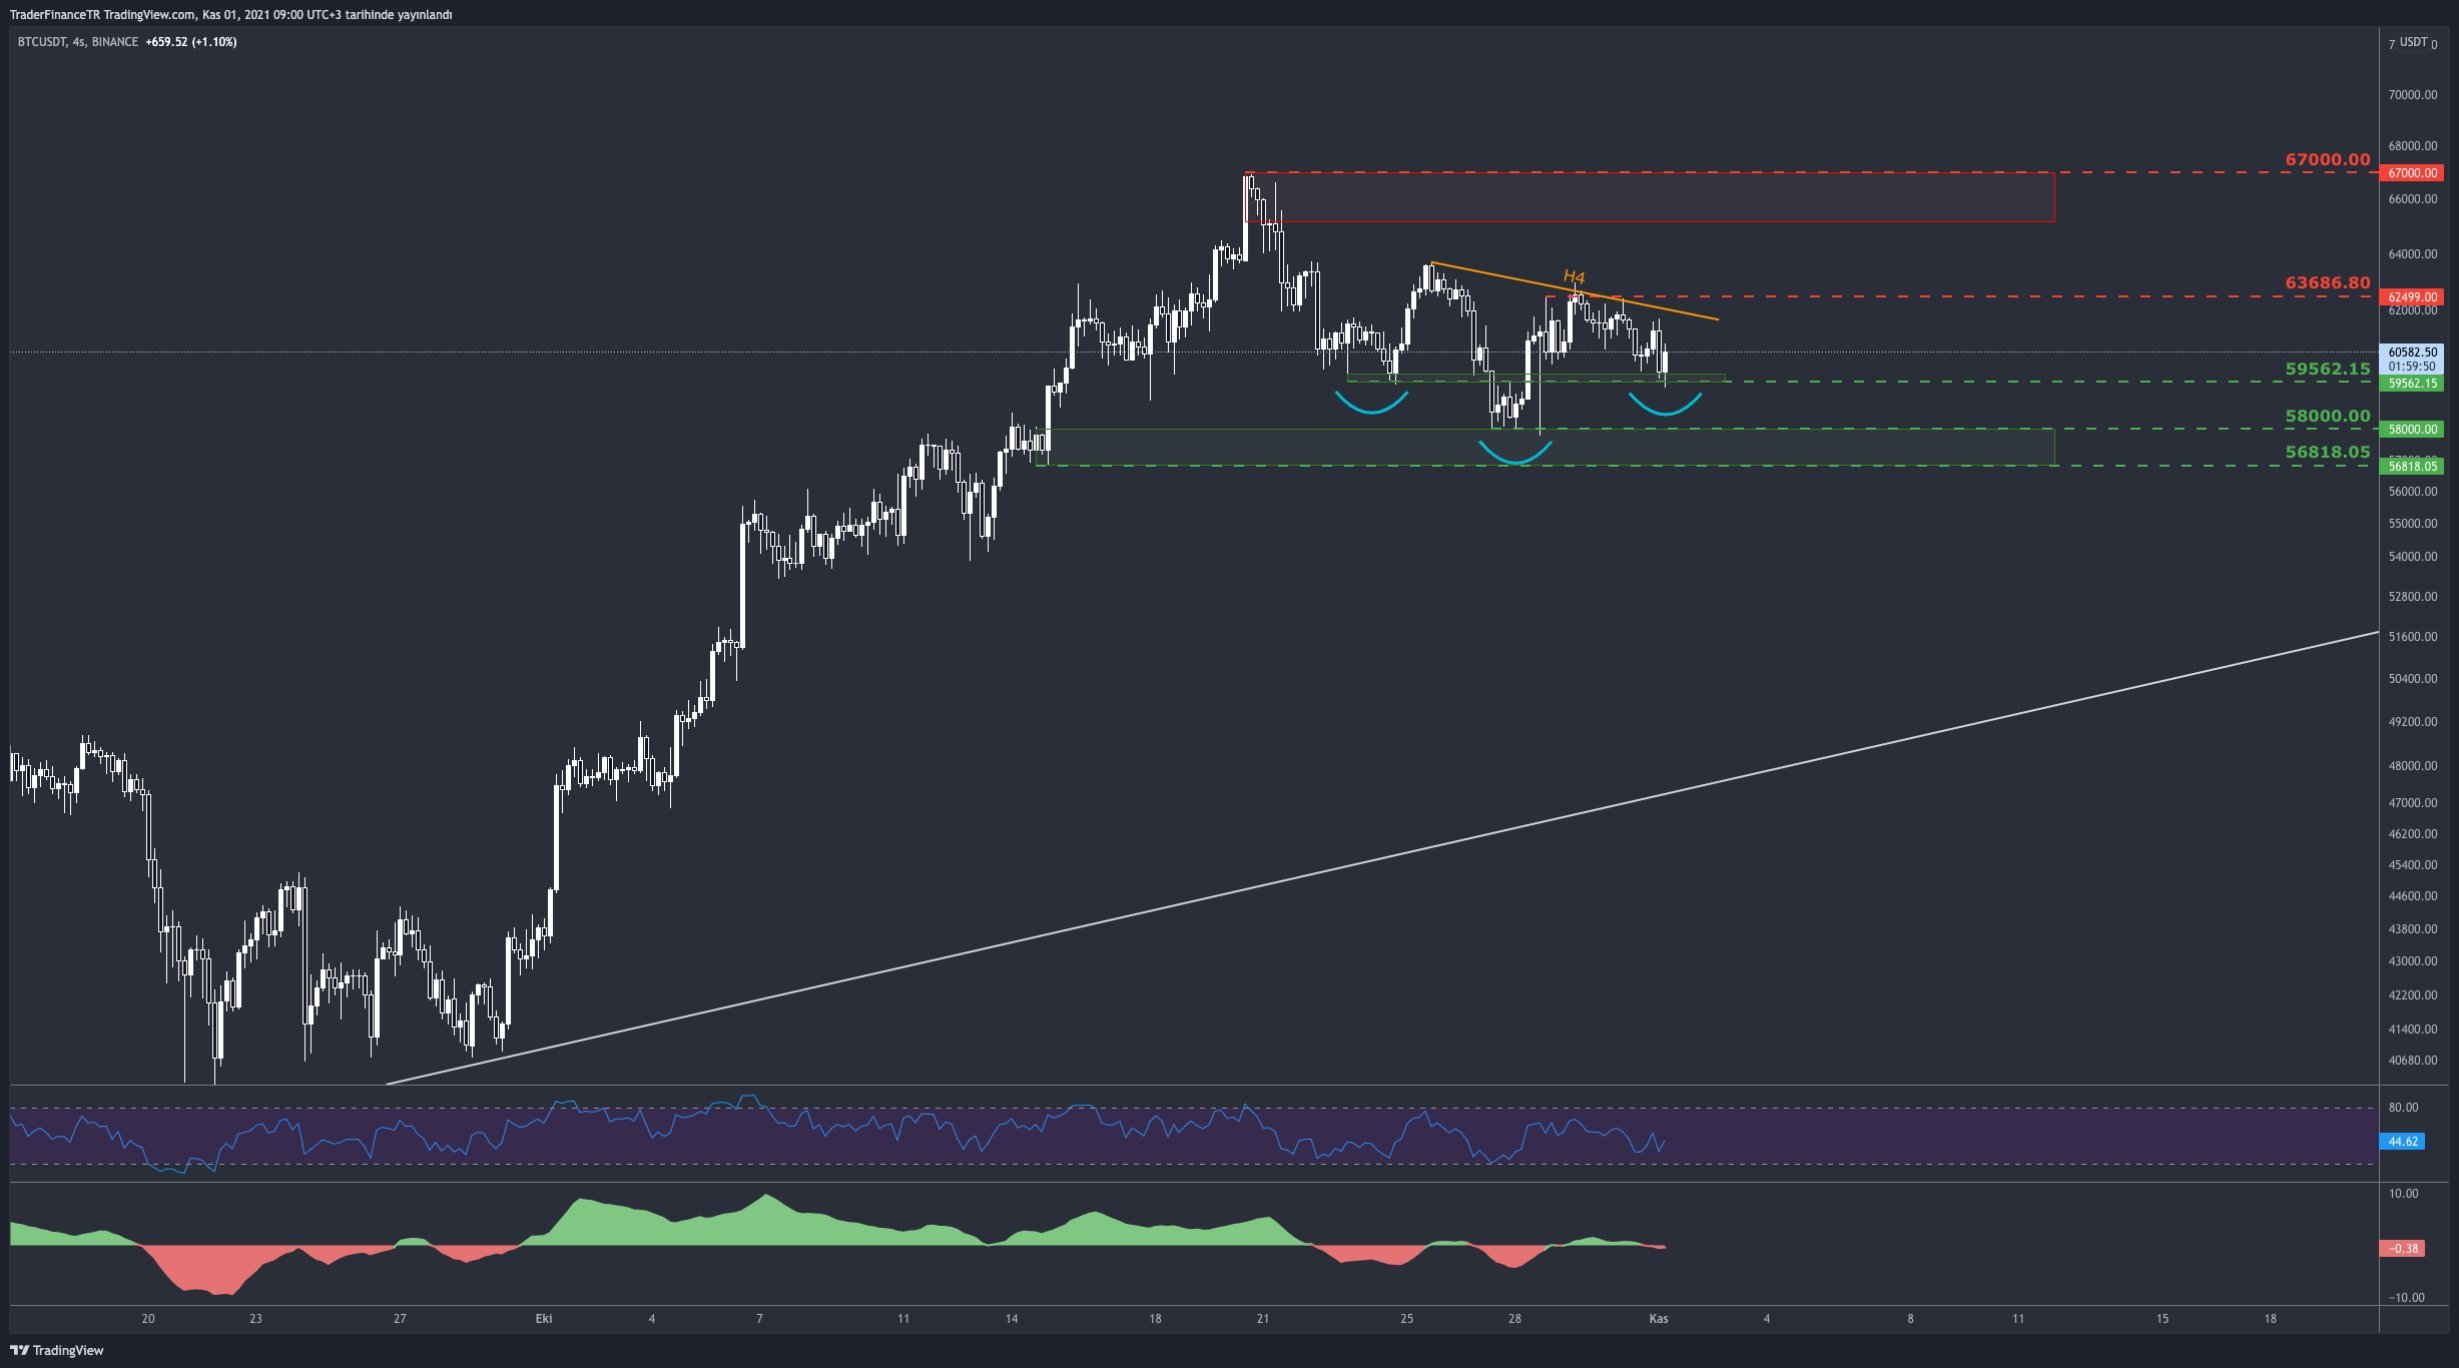 Bitcoin and Ether analysis: Highest monthly close in history in BTC and ETH Bitcoin (BTC) News  